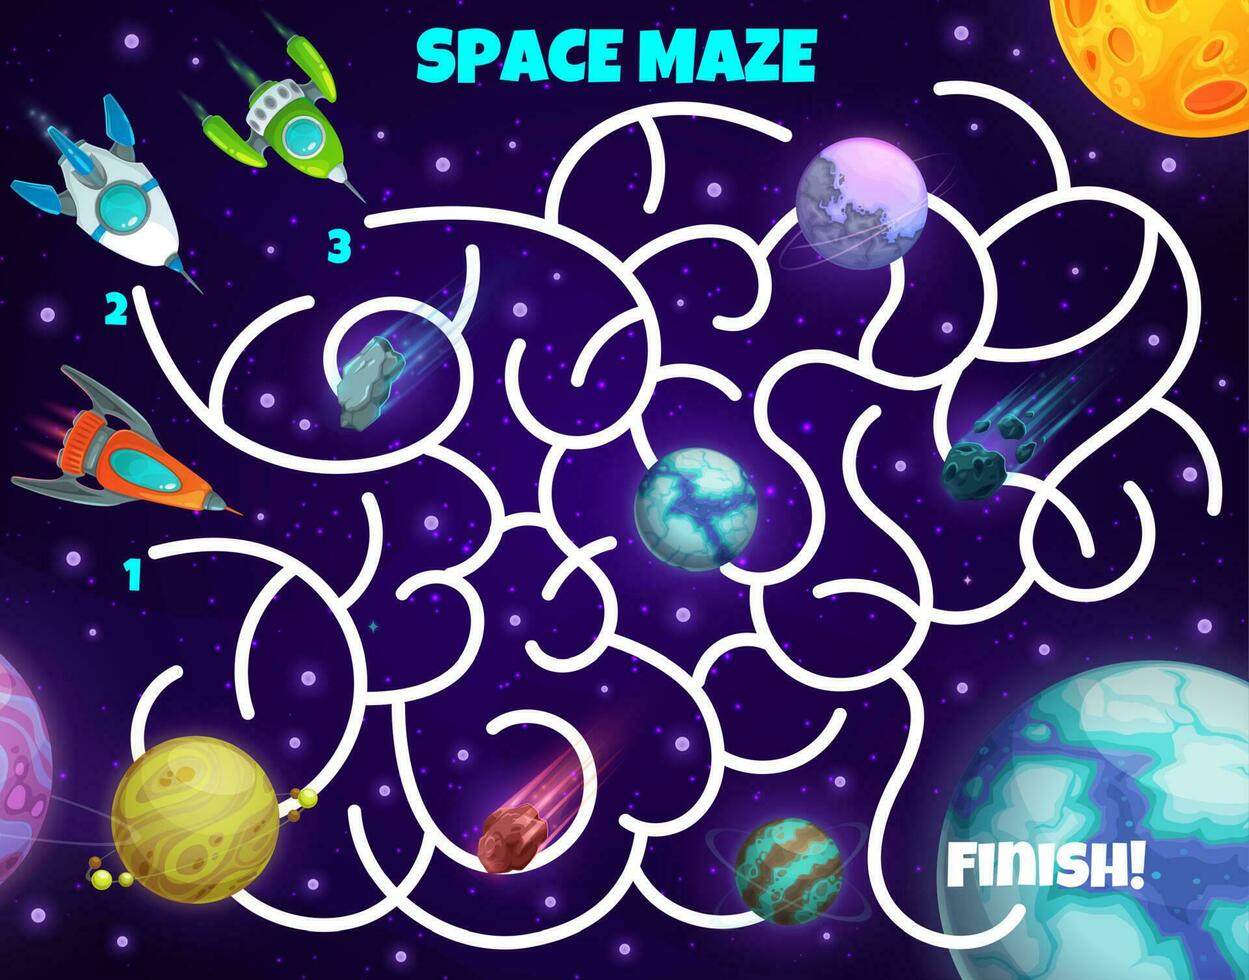 Labyrinth maze game spaceships and planets, test vector